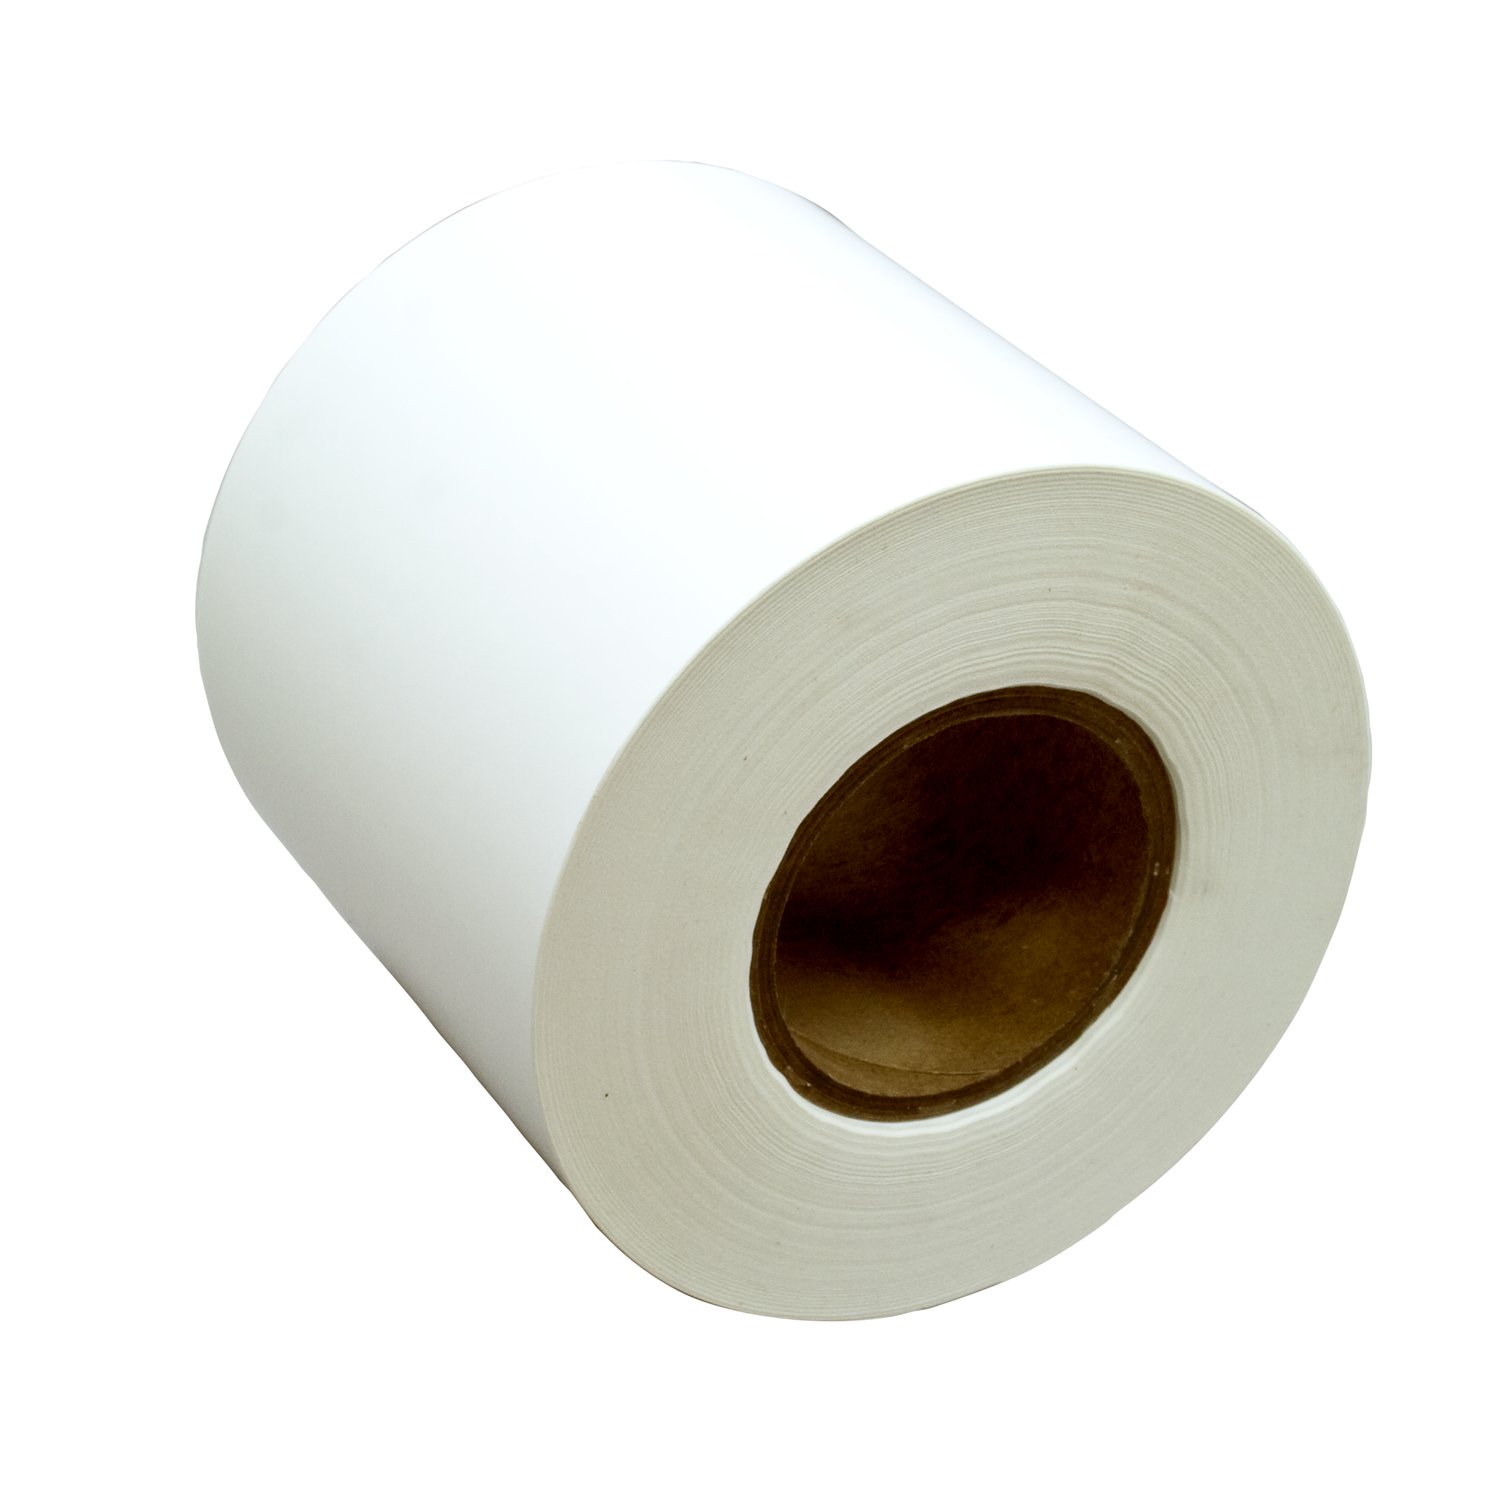 7000122366 - 3M Thermal Transfer Label Material 7818, Silver Polyester Matte, 4.5 in
x 1668 ft, 1 Roll/Case